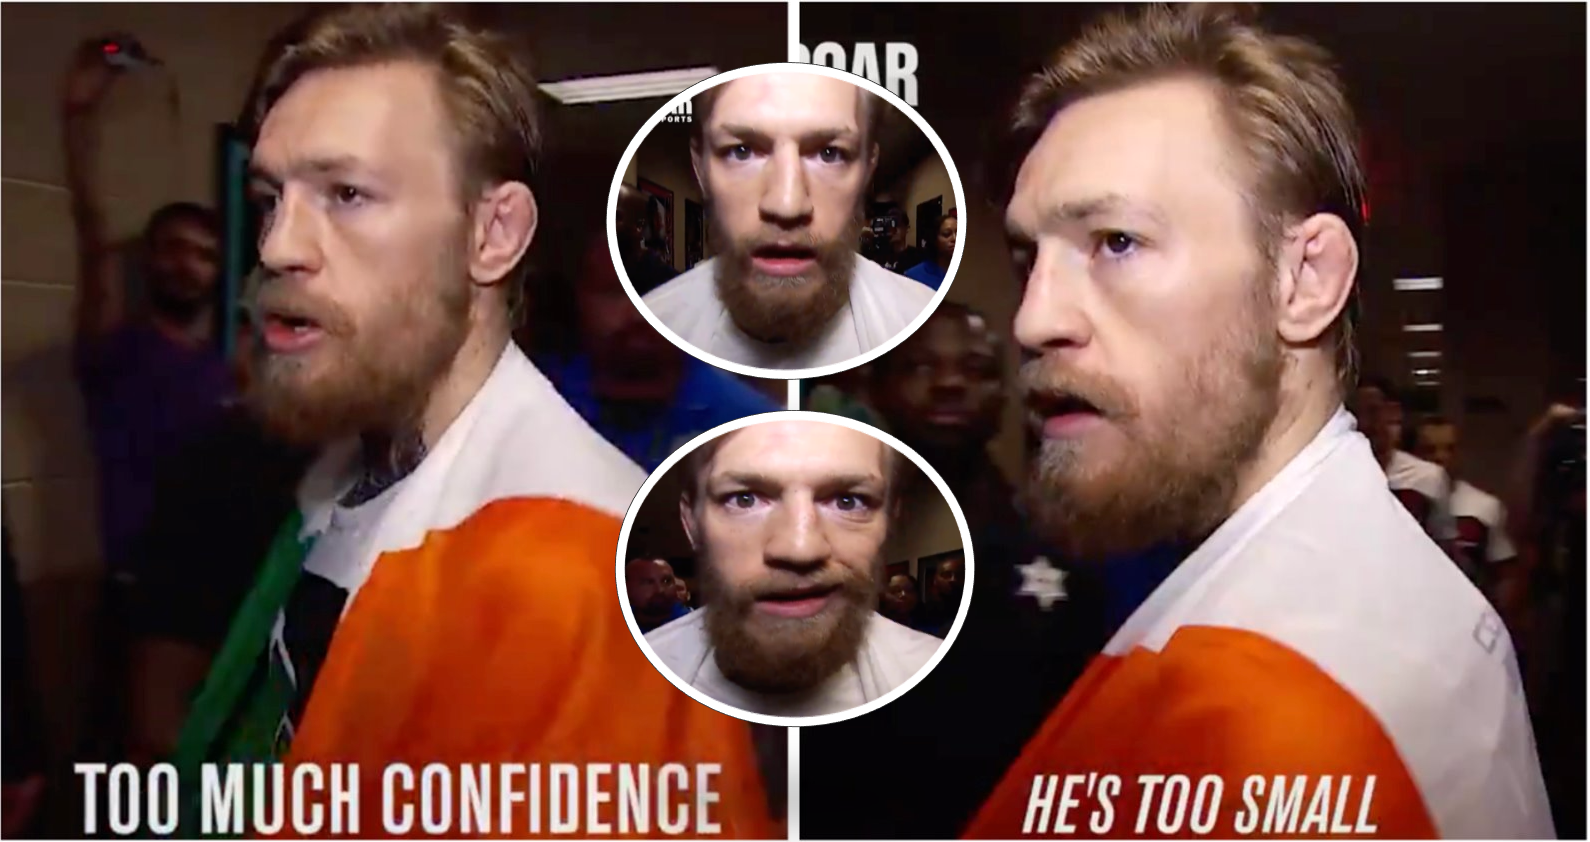 Conor McGregor psyching himself up backstage for fight at UFC 189 is intense